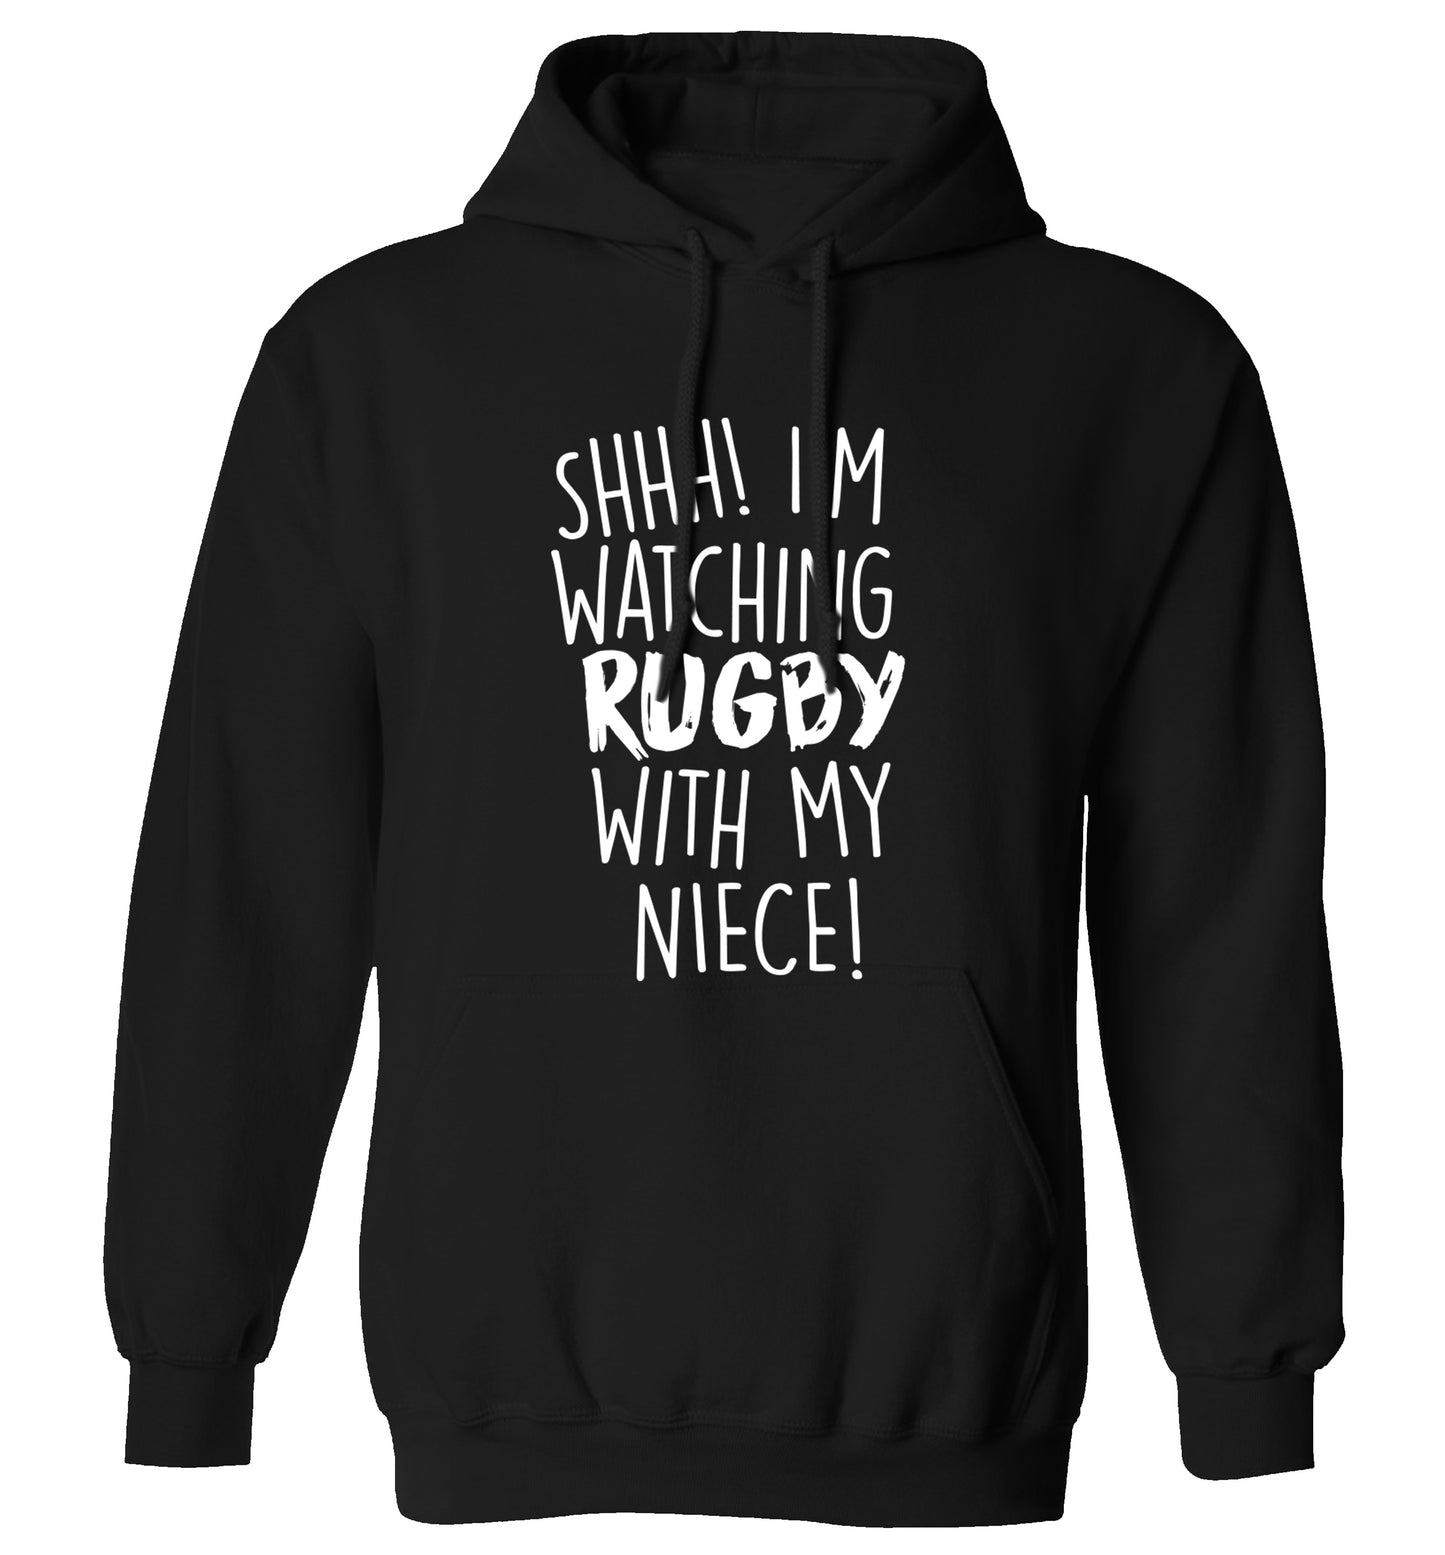 Shh.. I'm watching rugby with my niece adults unisex black hoodie 2XL